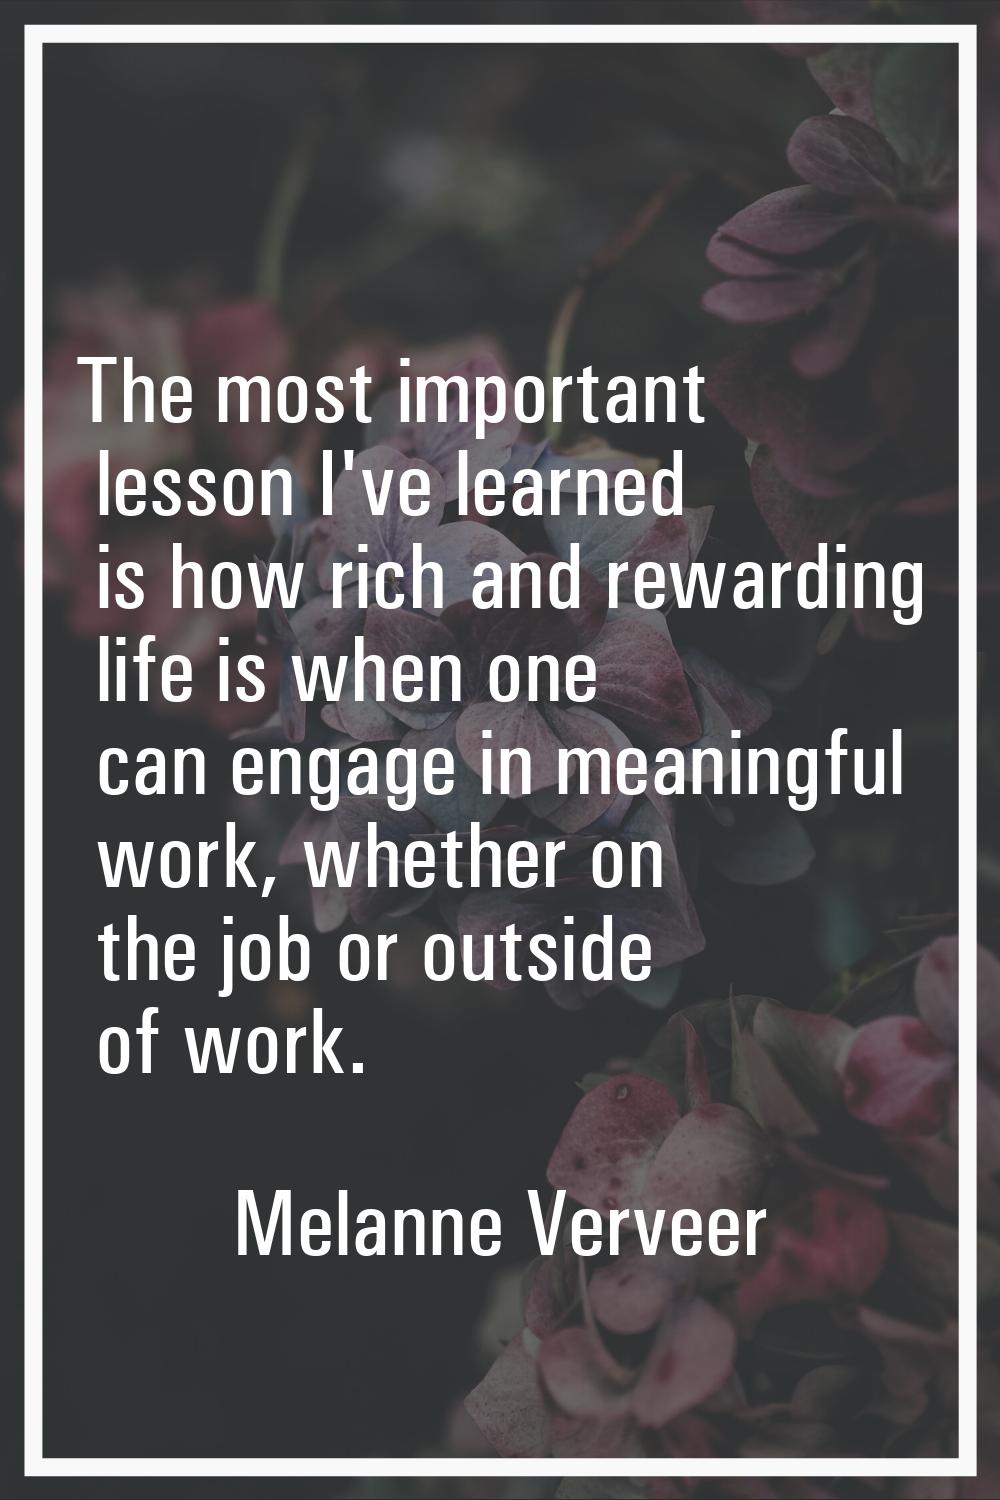 The most important lesson I've learned is how rich and rewarding life is when one can engage in mea